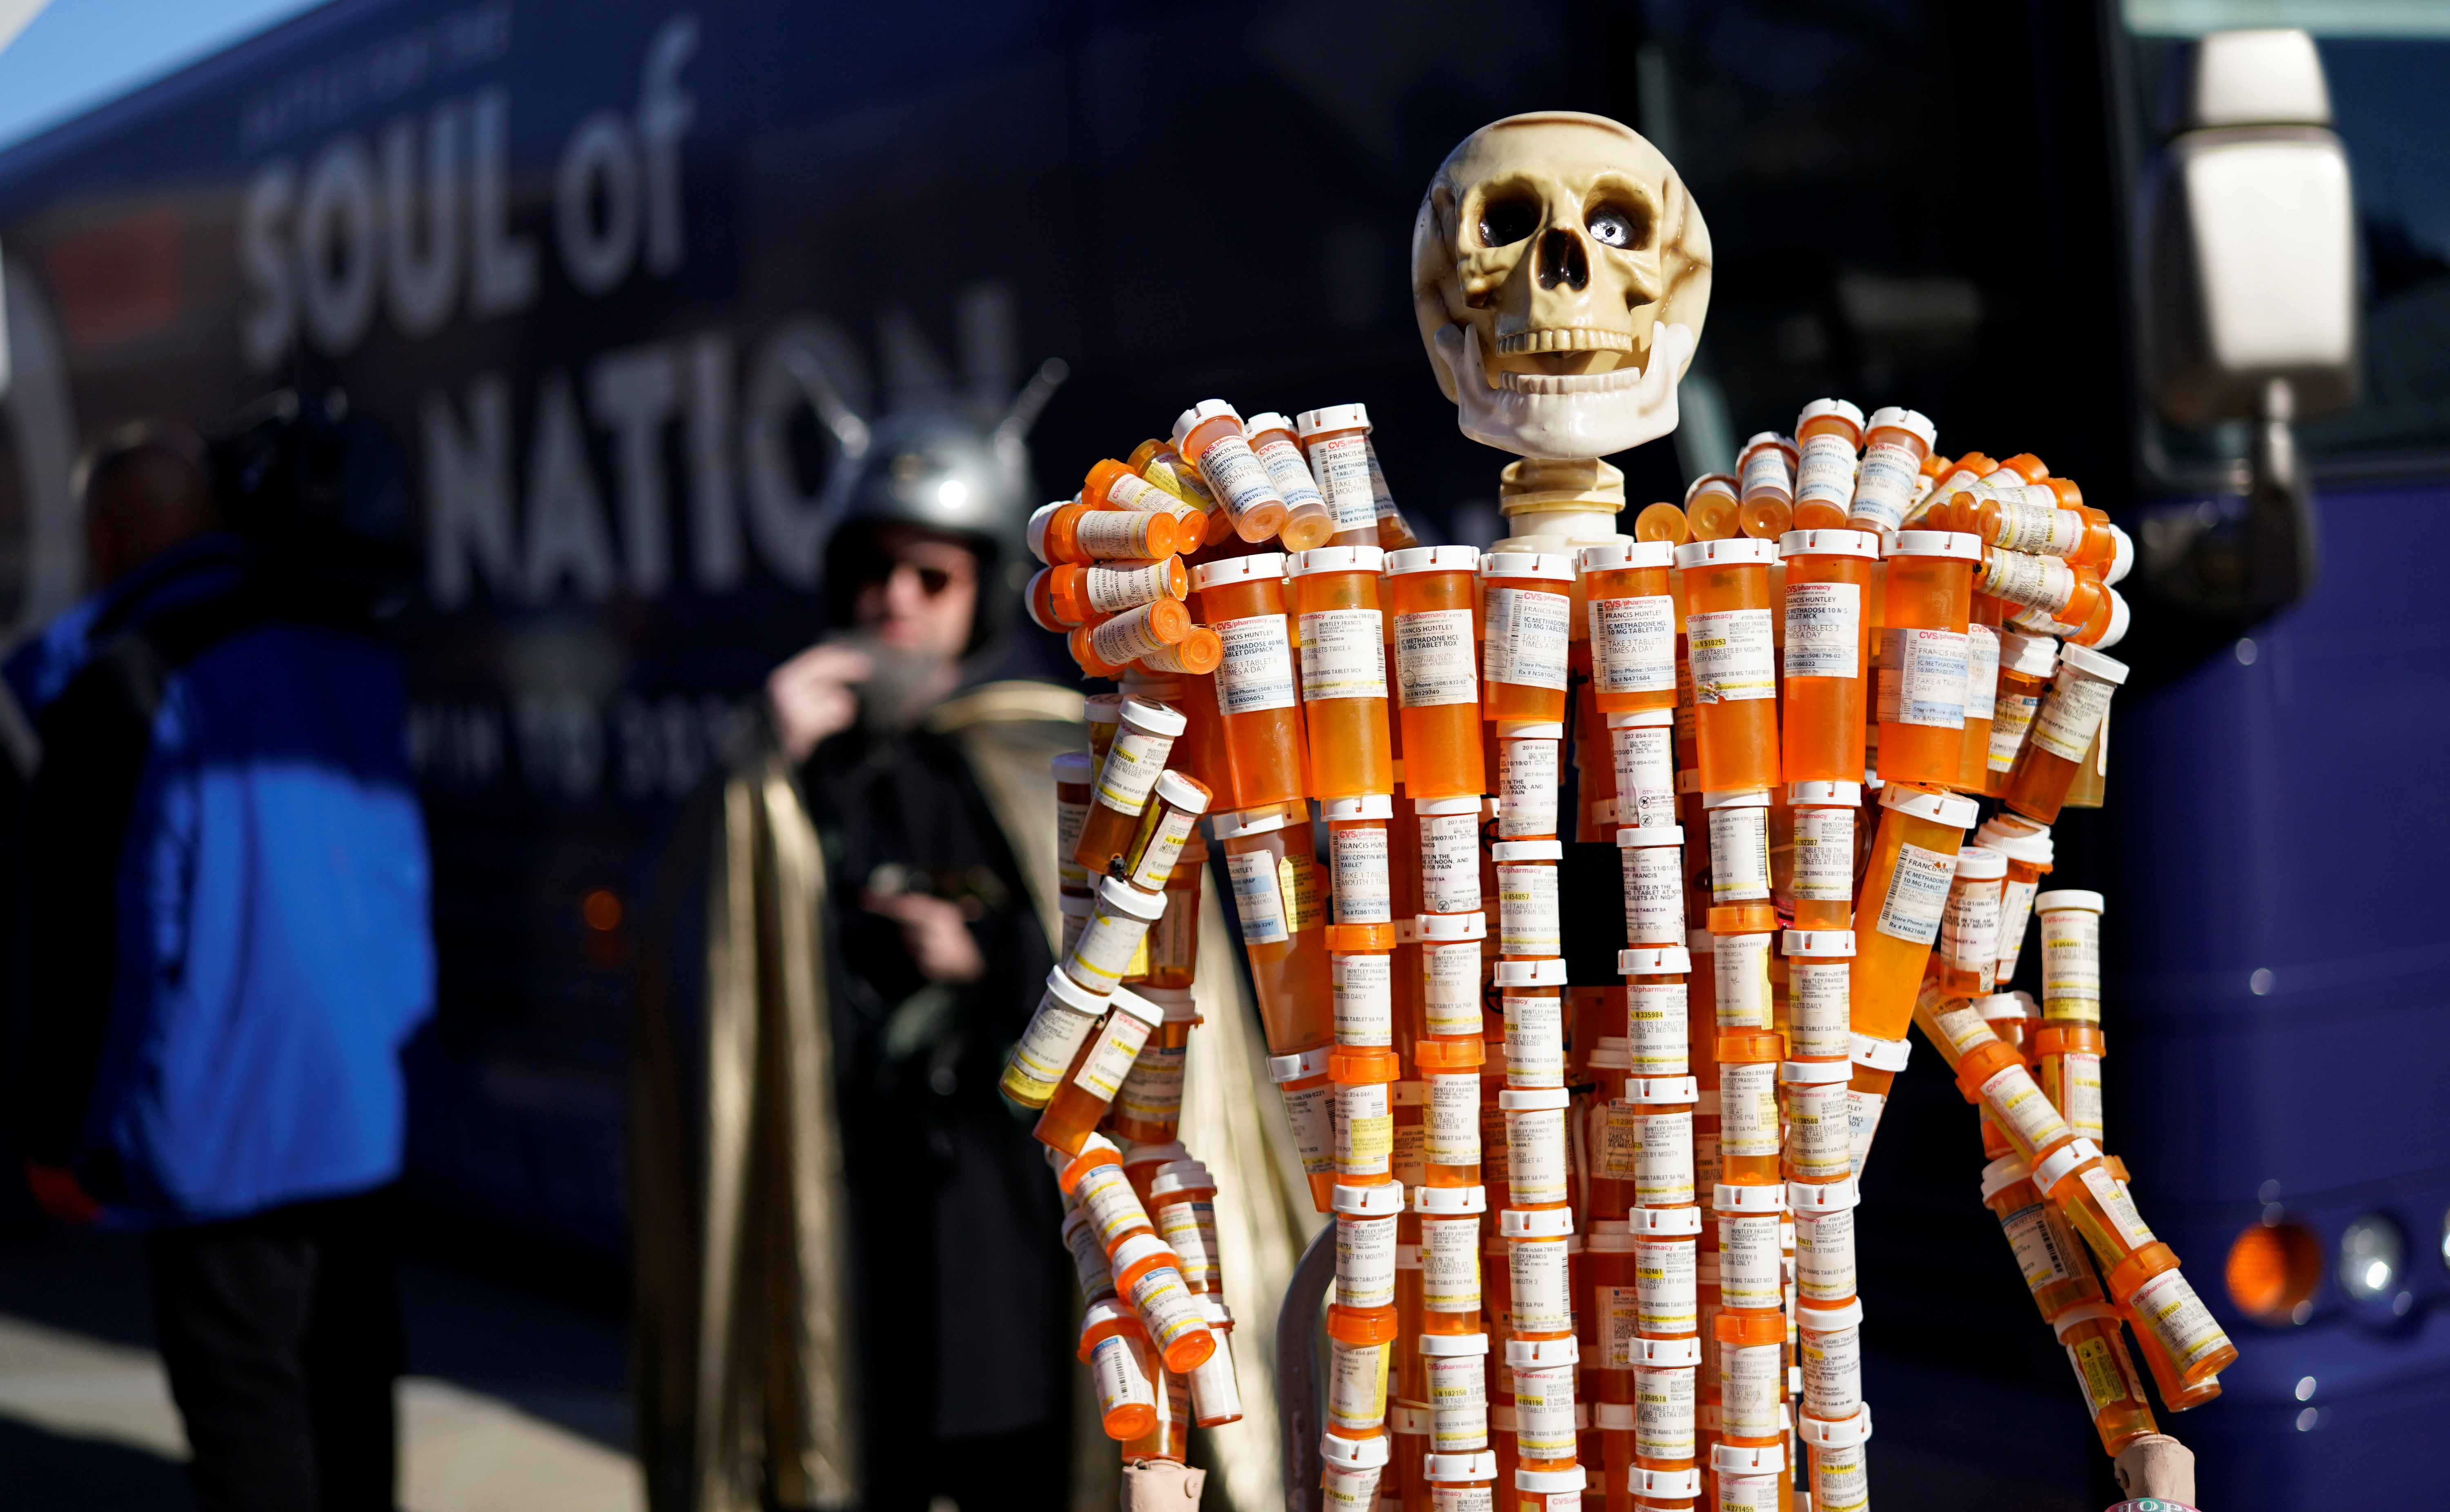 A sculpture made out of opiod pill bottles is set up next to Democratic presidential candidate and former Vice President Joe Biden's campaign bus in Somersworth